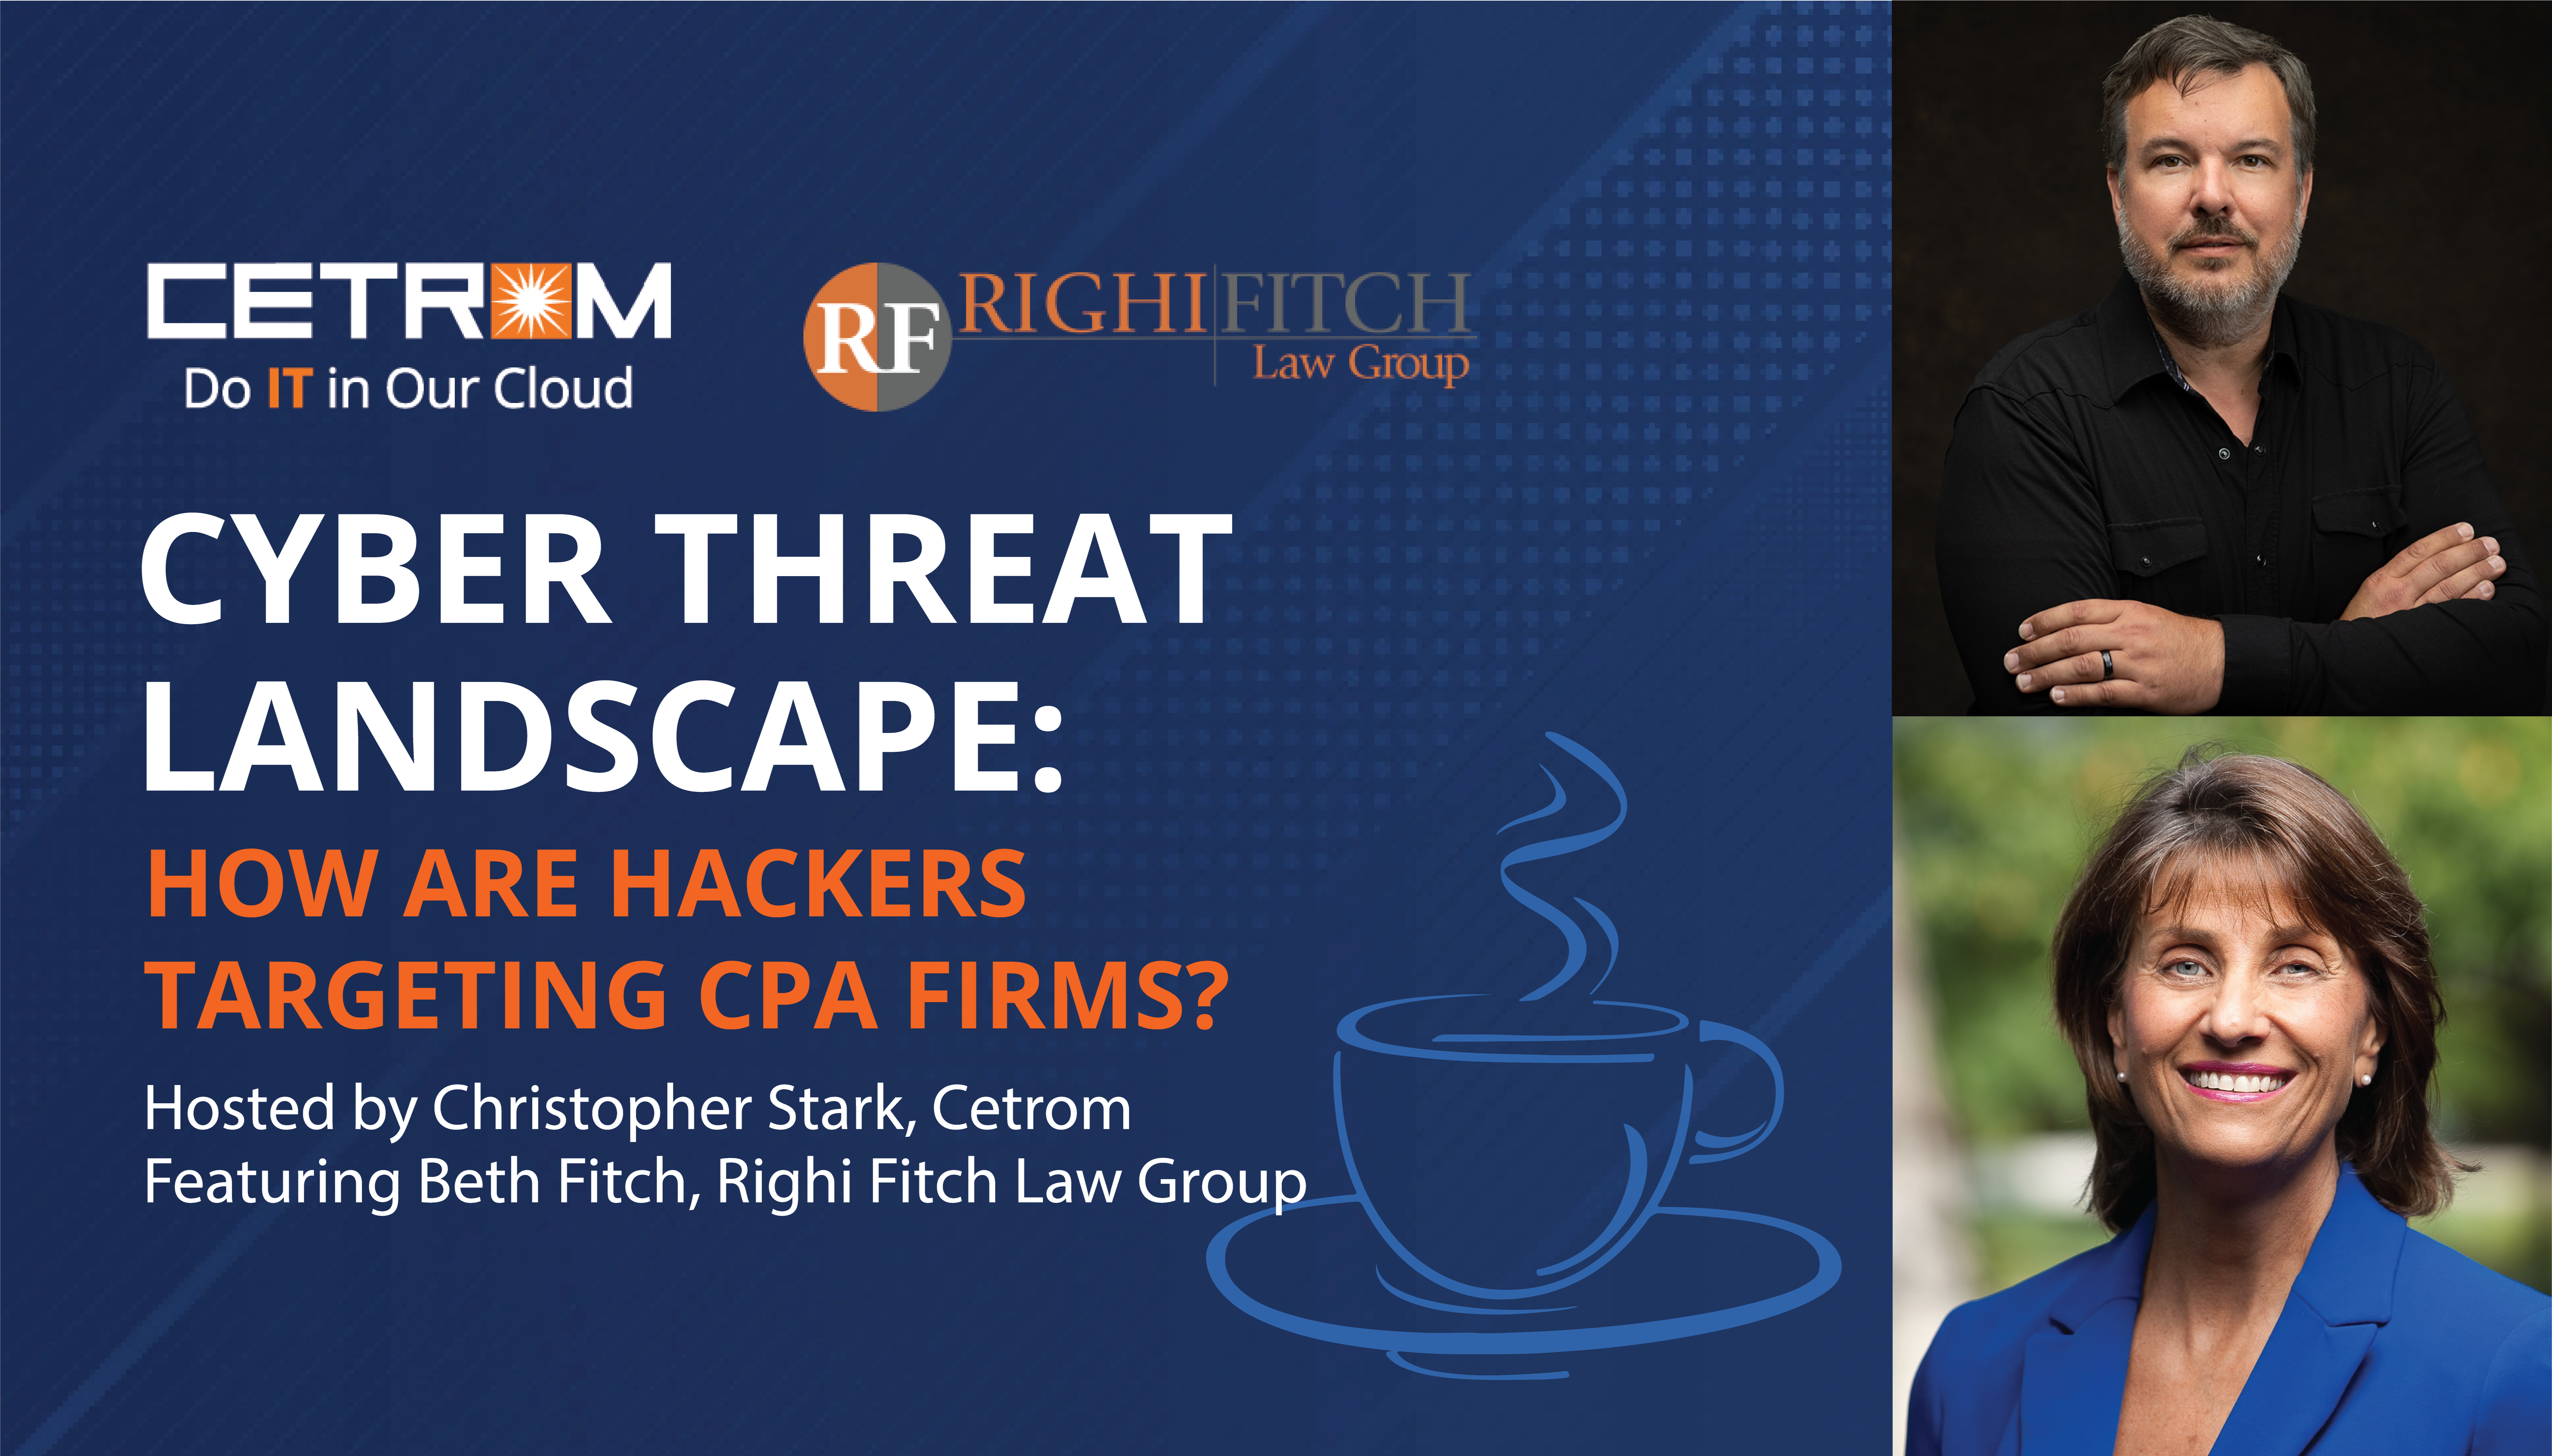 Cyber Threat Landscape: Expert Coffee Talk featuring Righi Fitch Law Group